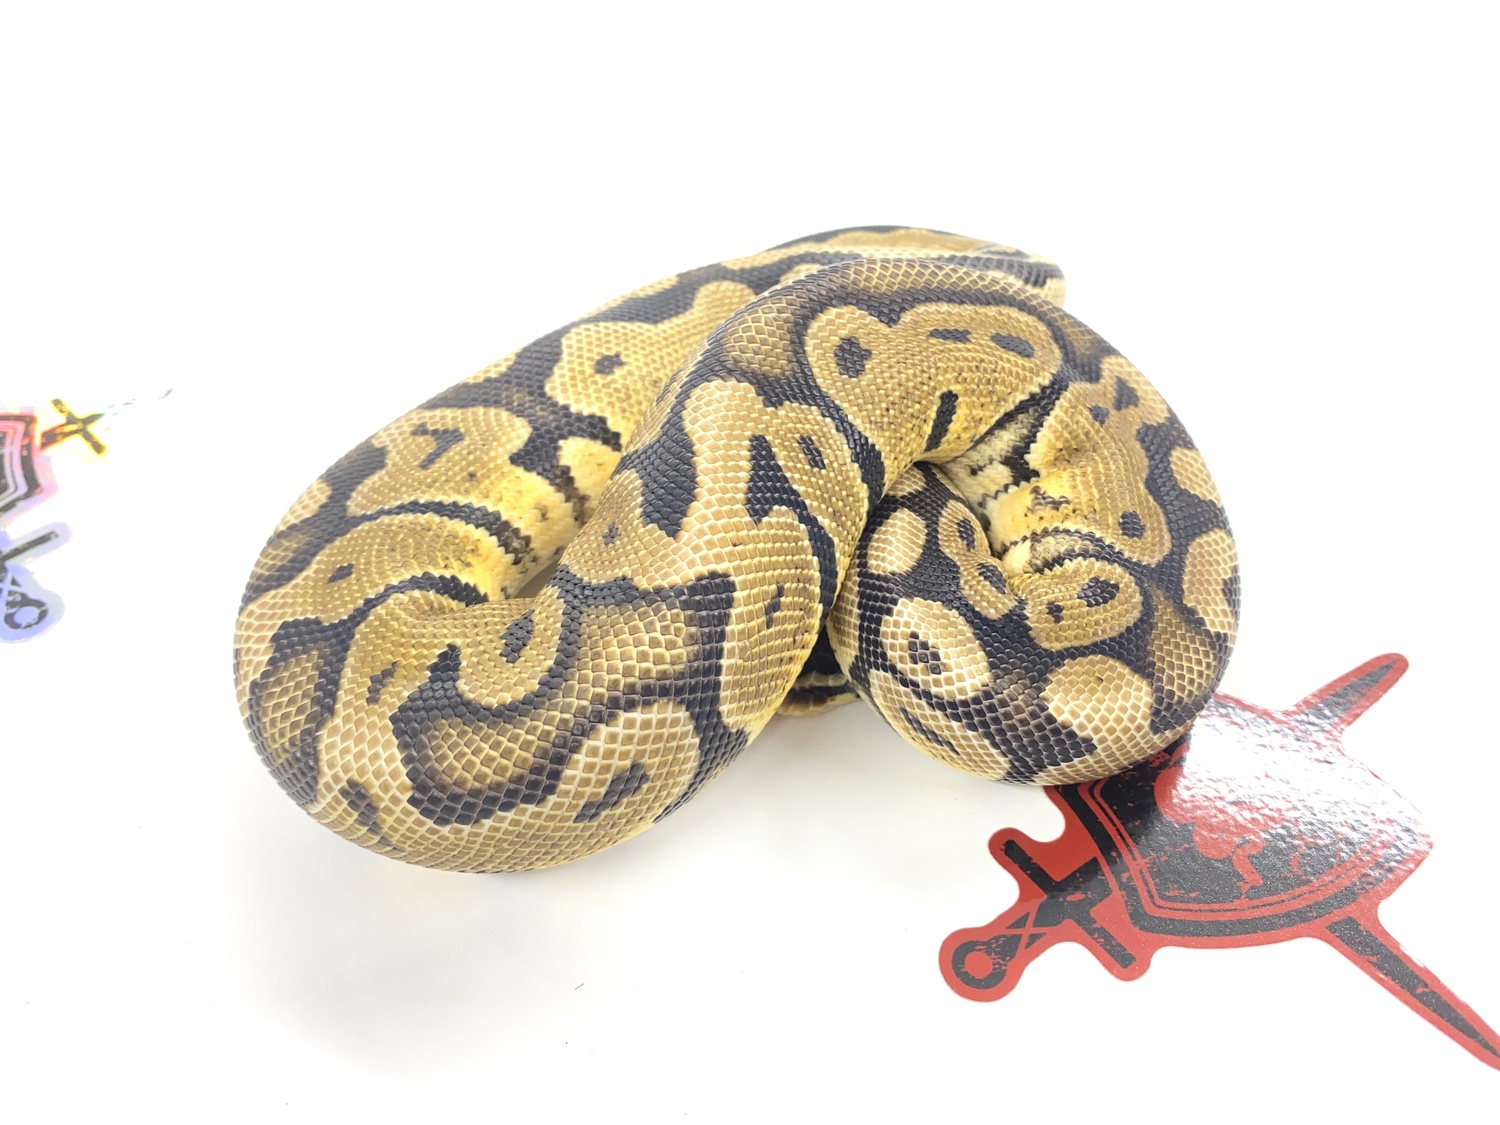 Pastel Joppa Ball Python by Ectothermic Dungeon